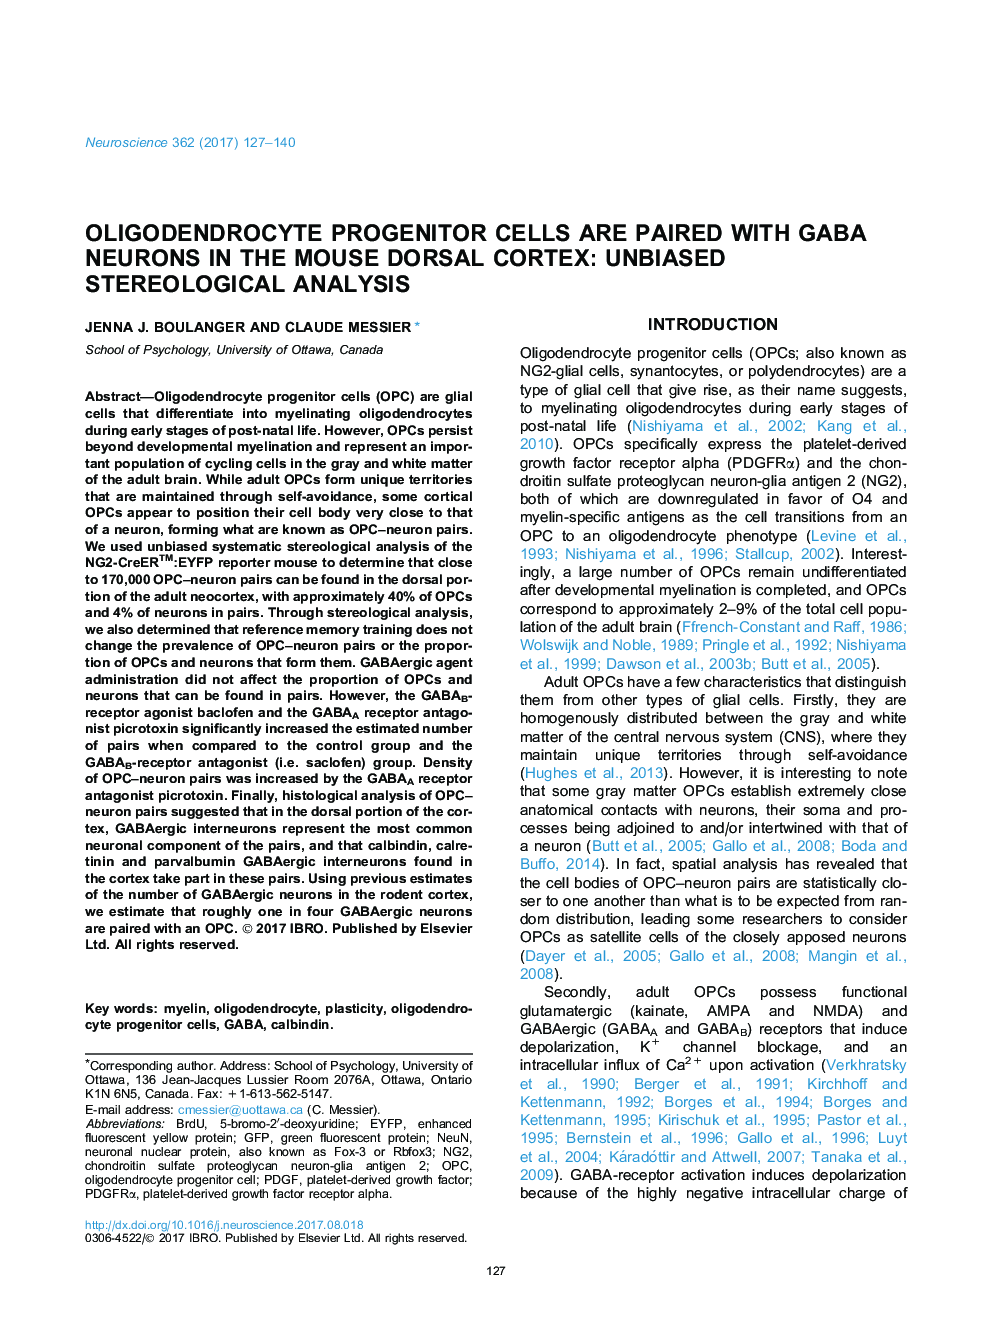 Oligodendrocyte progenitor cells are paired with GABA neurons in the mouse dorsal cortex: Unbiased stereological analysis